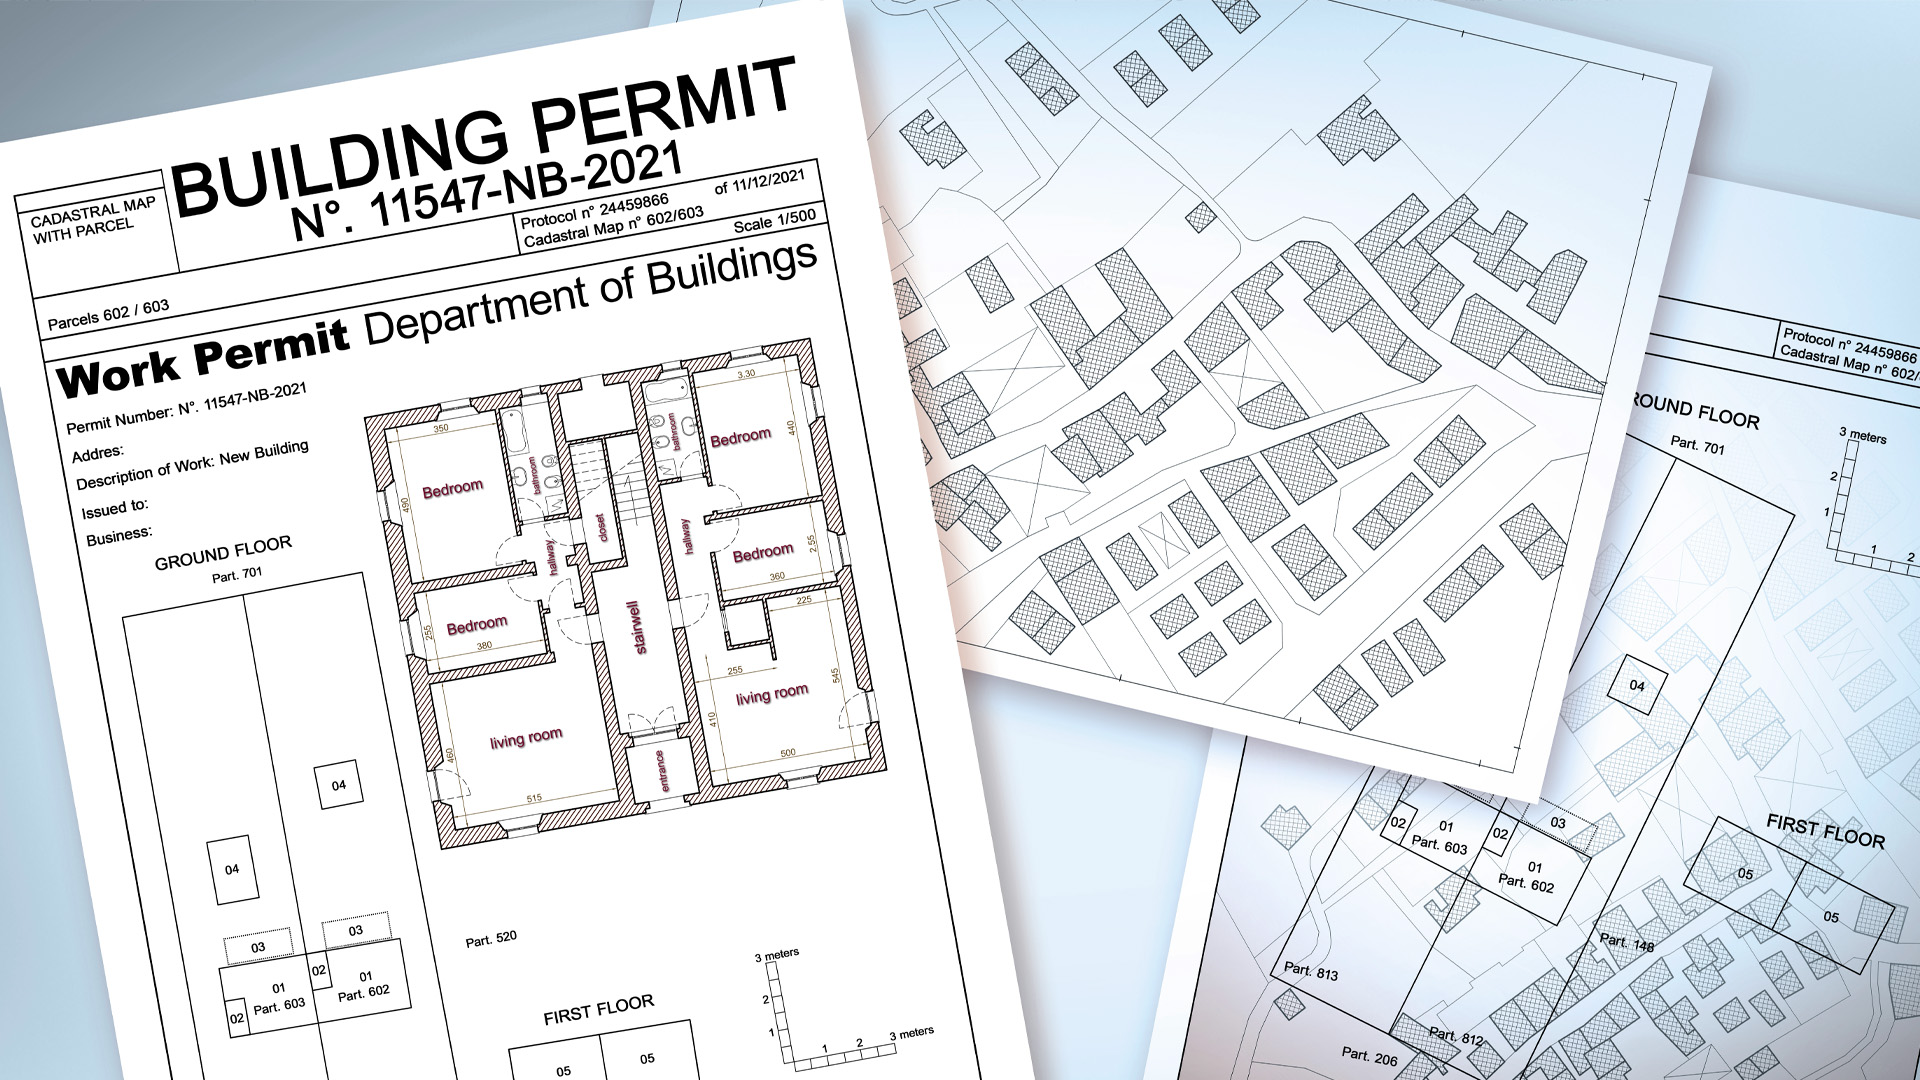 Expediting the Building Permit Review Process: 3 Ways Our Team Can Help